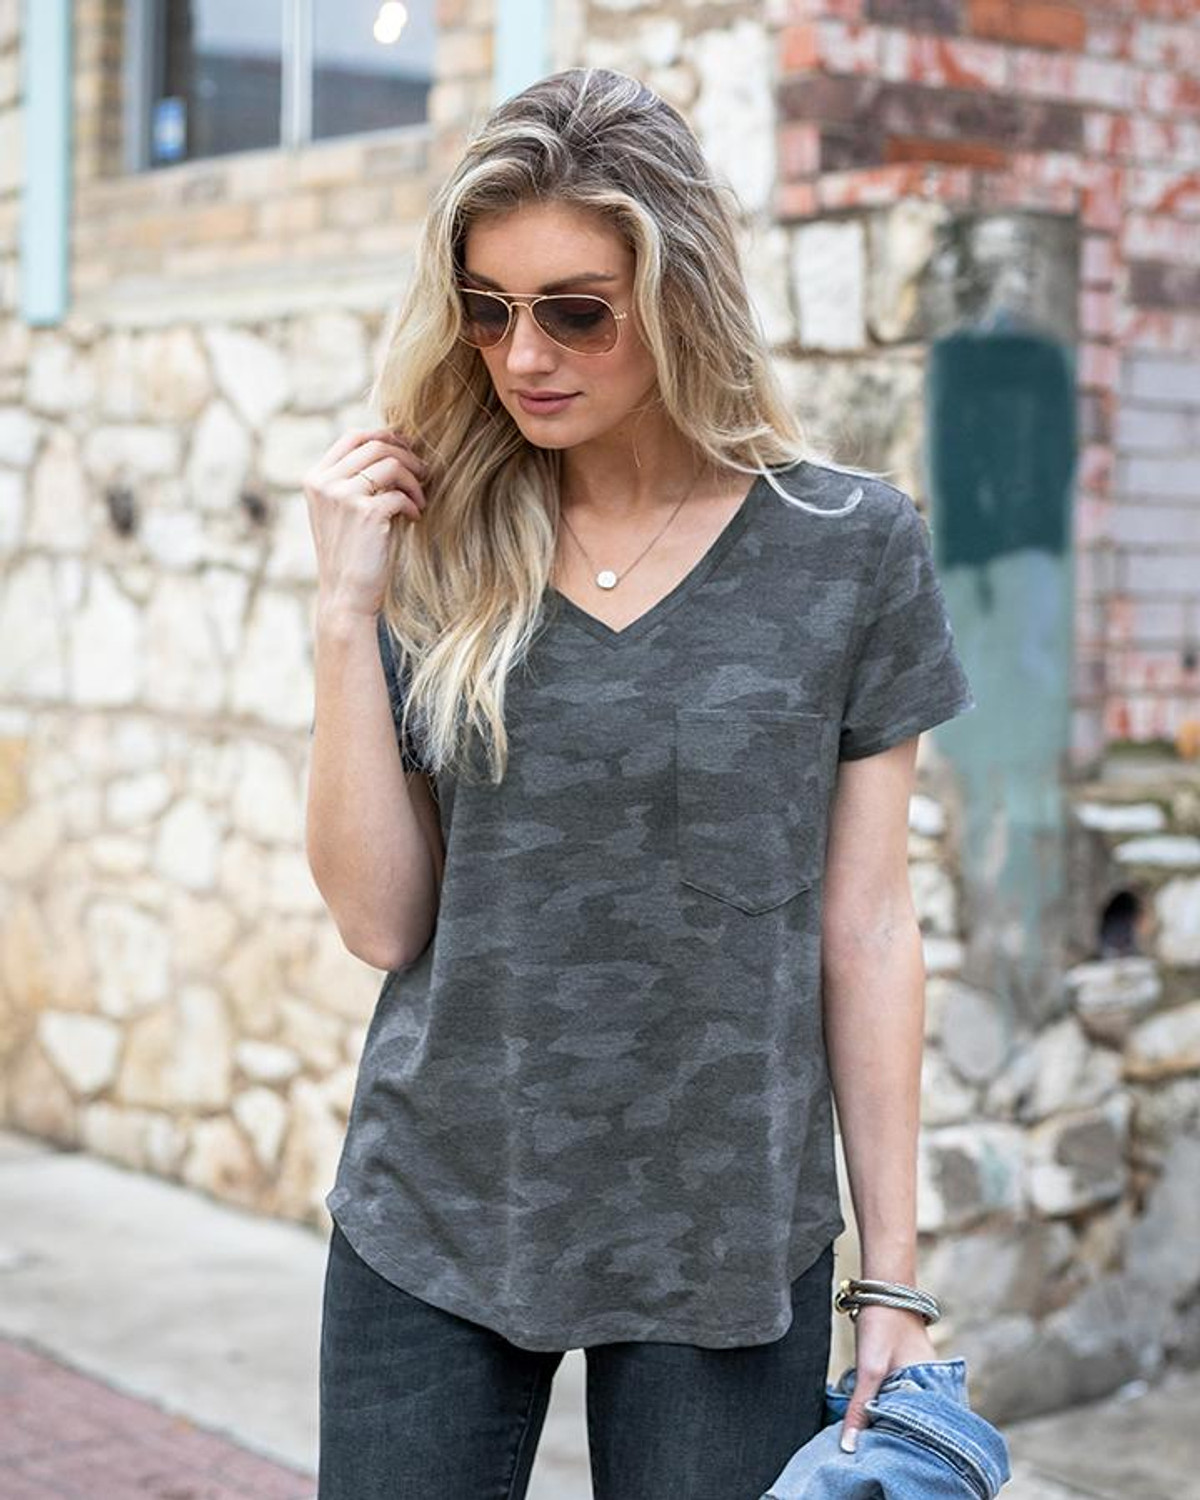 https://cdn11.bigcommerce.com/s-xhdw5oo/images/stencil/1200x1800/products/2105/6628/PPT-VNeck_charcoal-camo_2_2048x__08358.1615507649.jpg?c=2